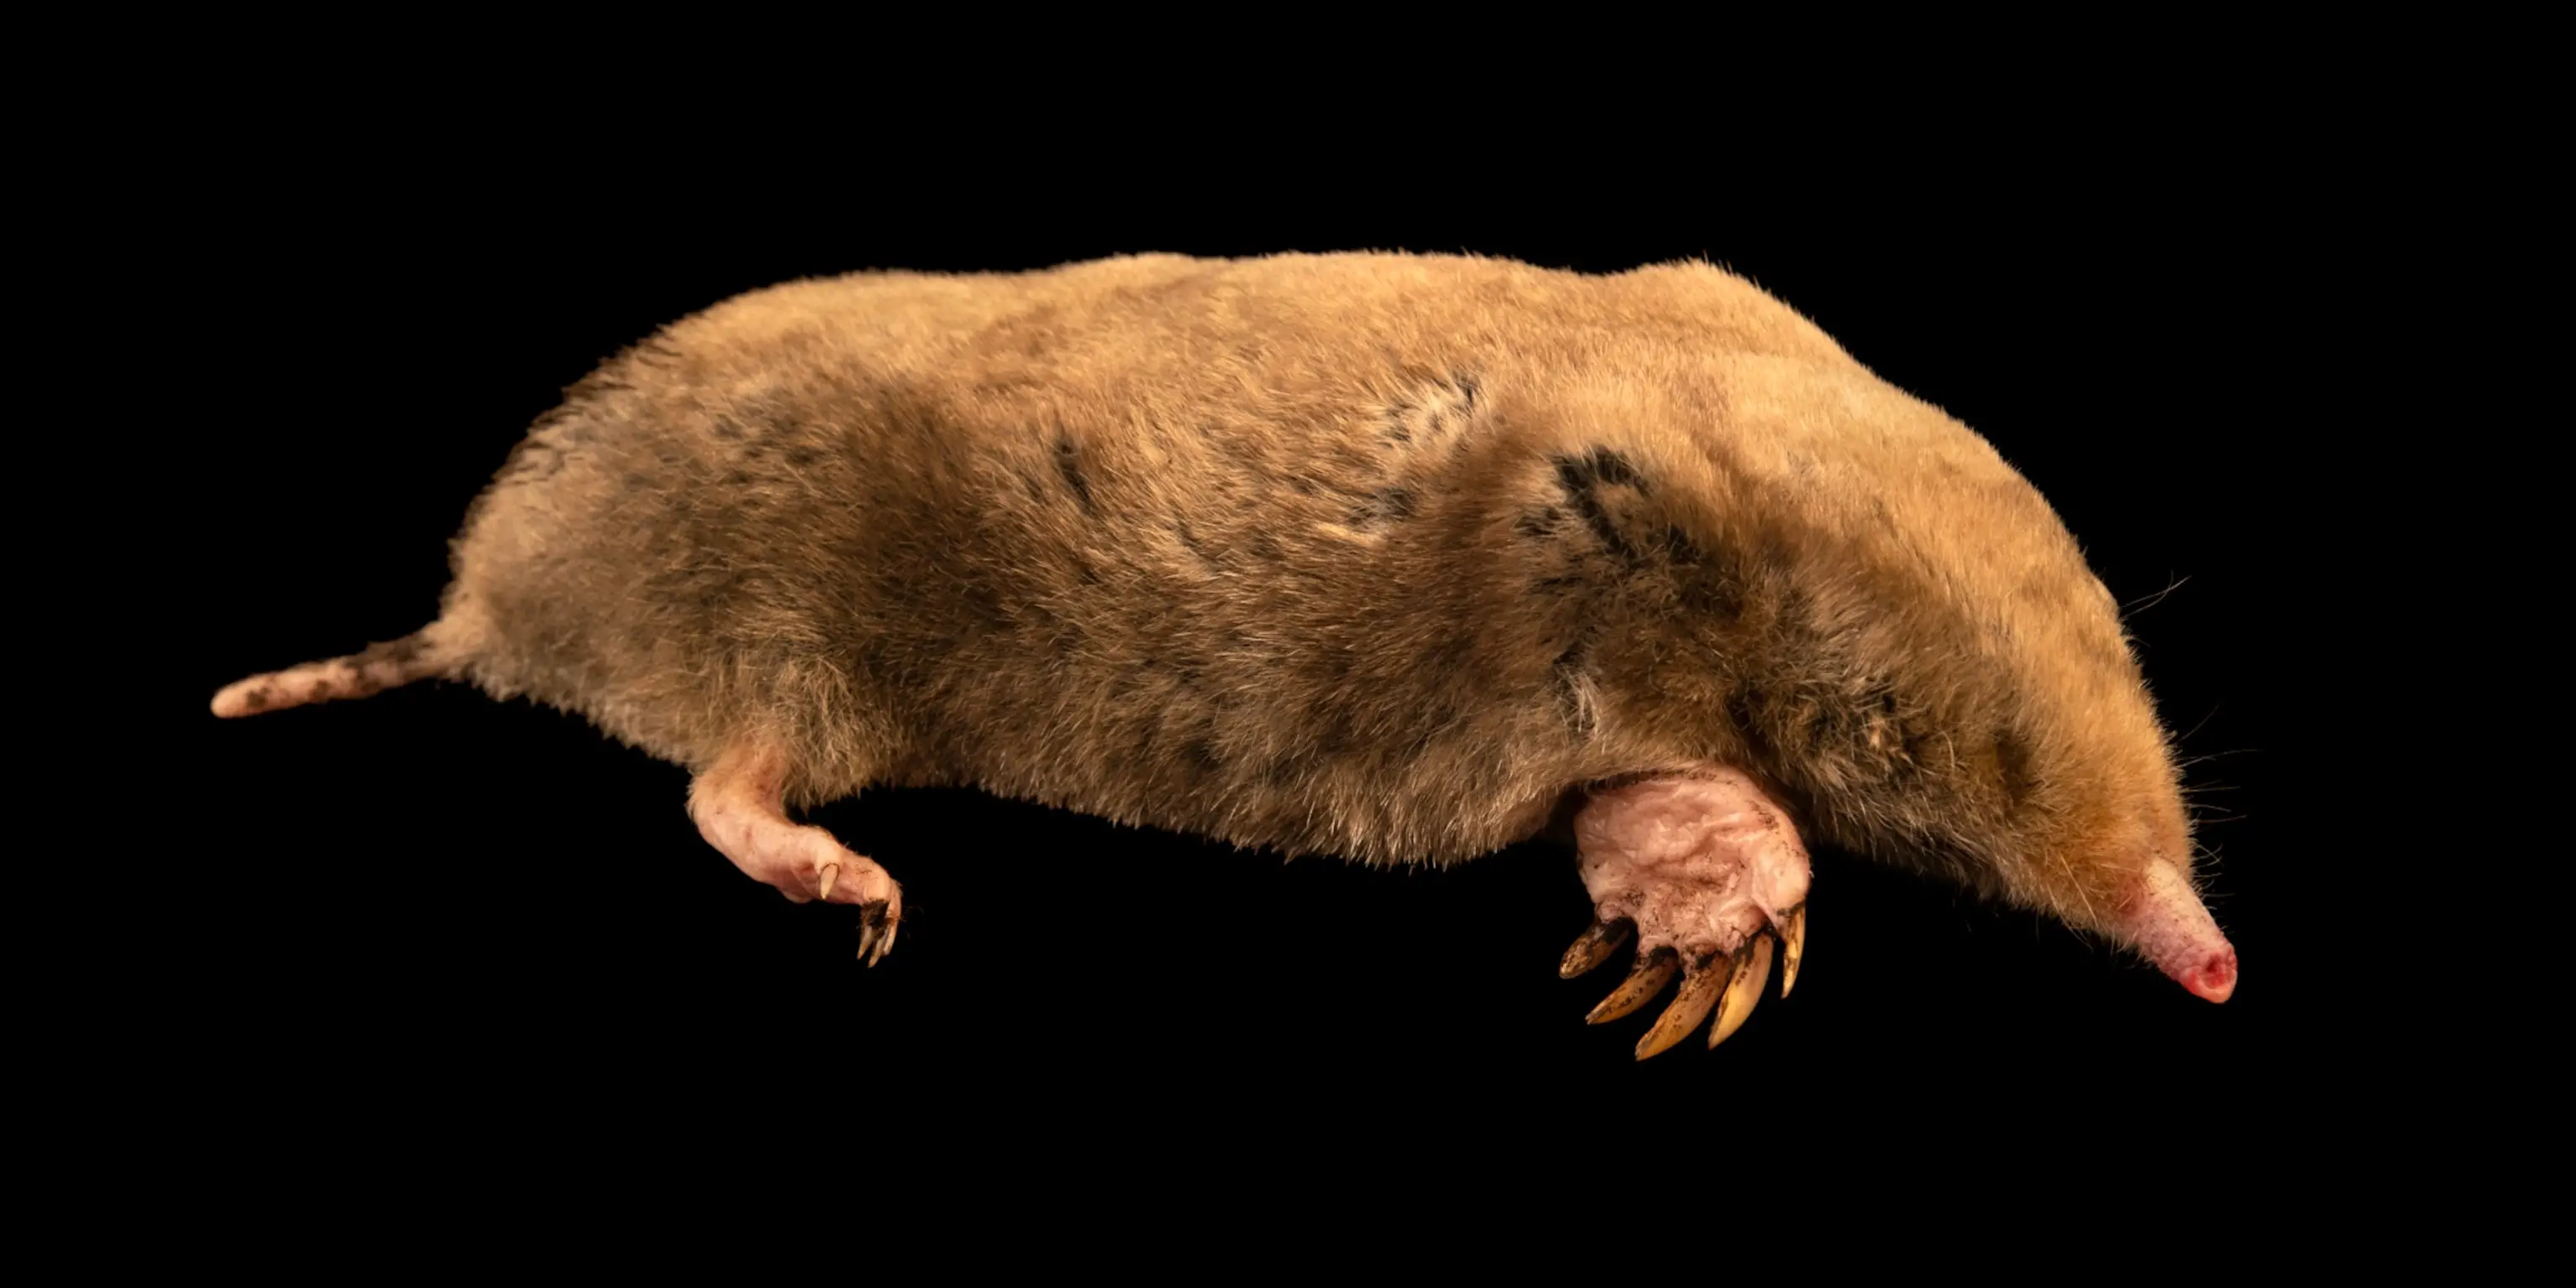 What Does A Mole In A House Look Like?